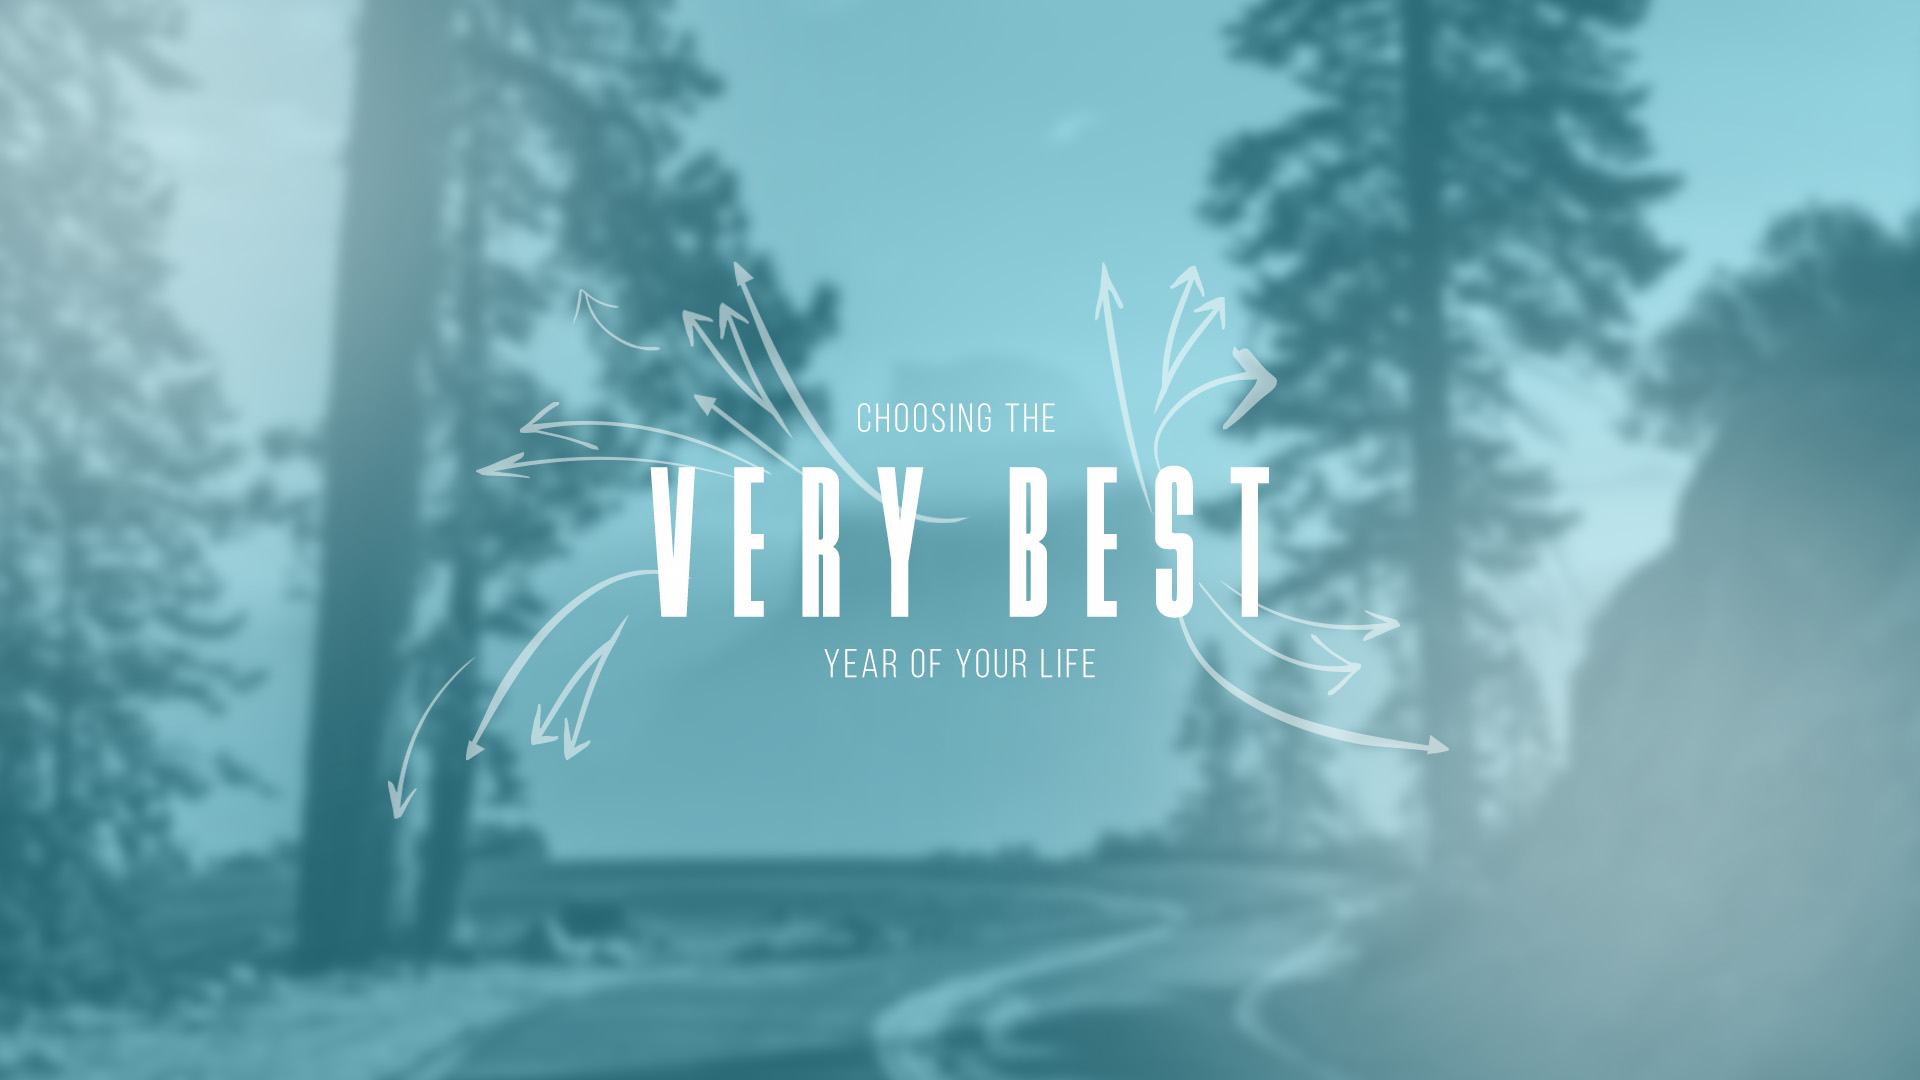 CHOOSING THE VERY BEST YEAR OF YOUR LIFE